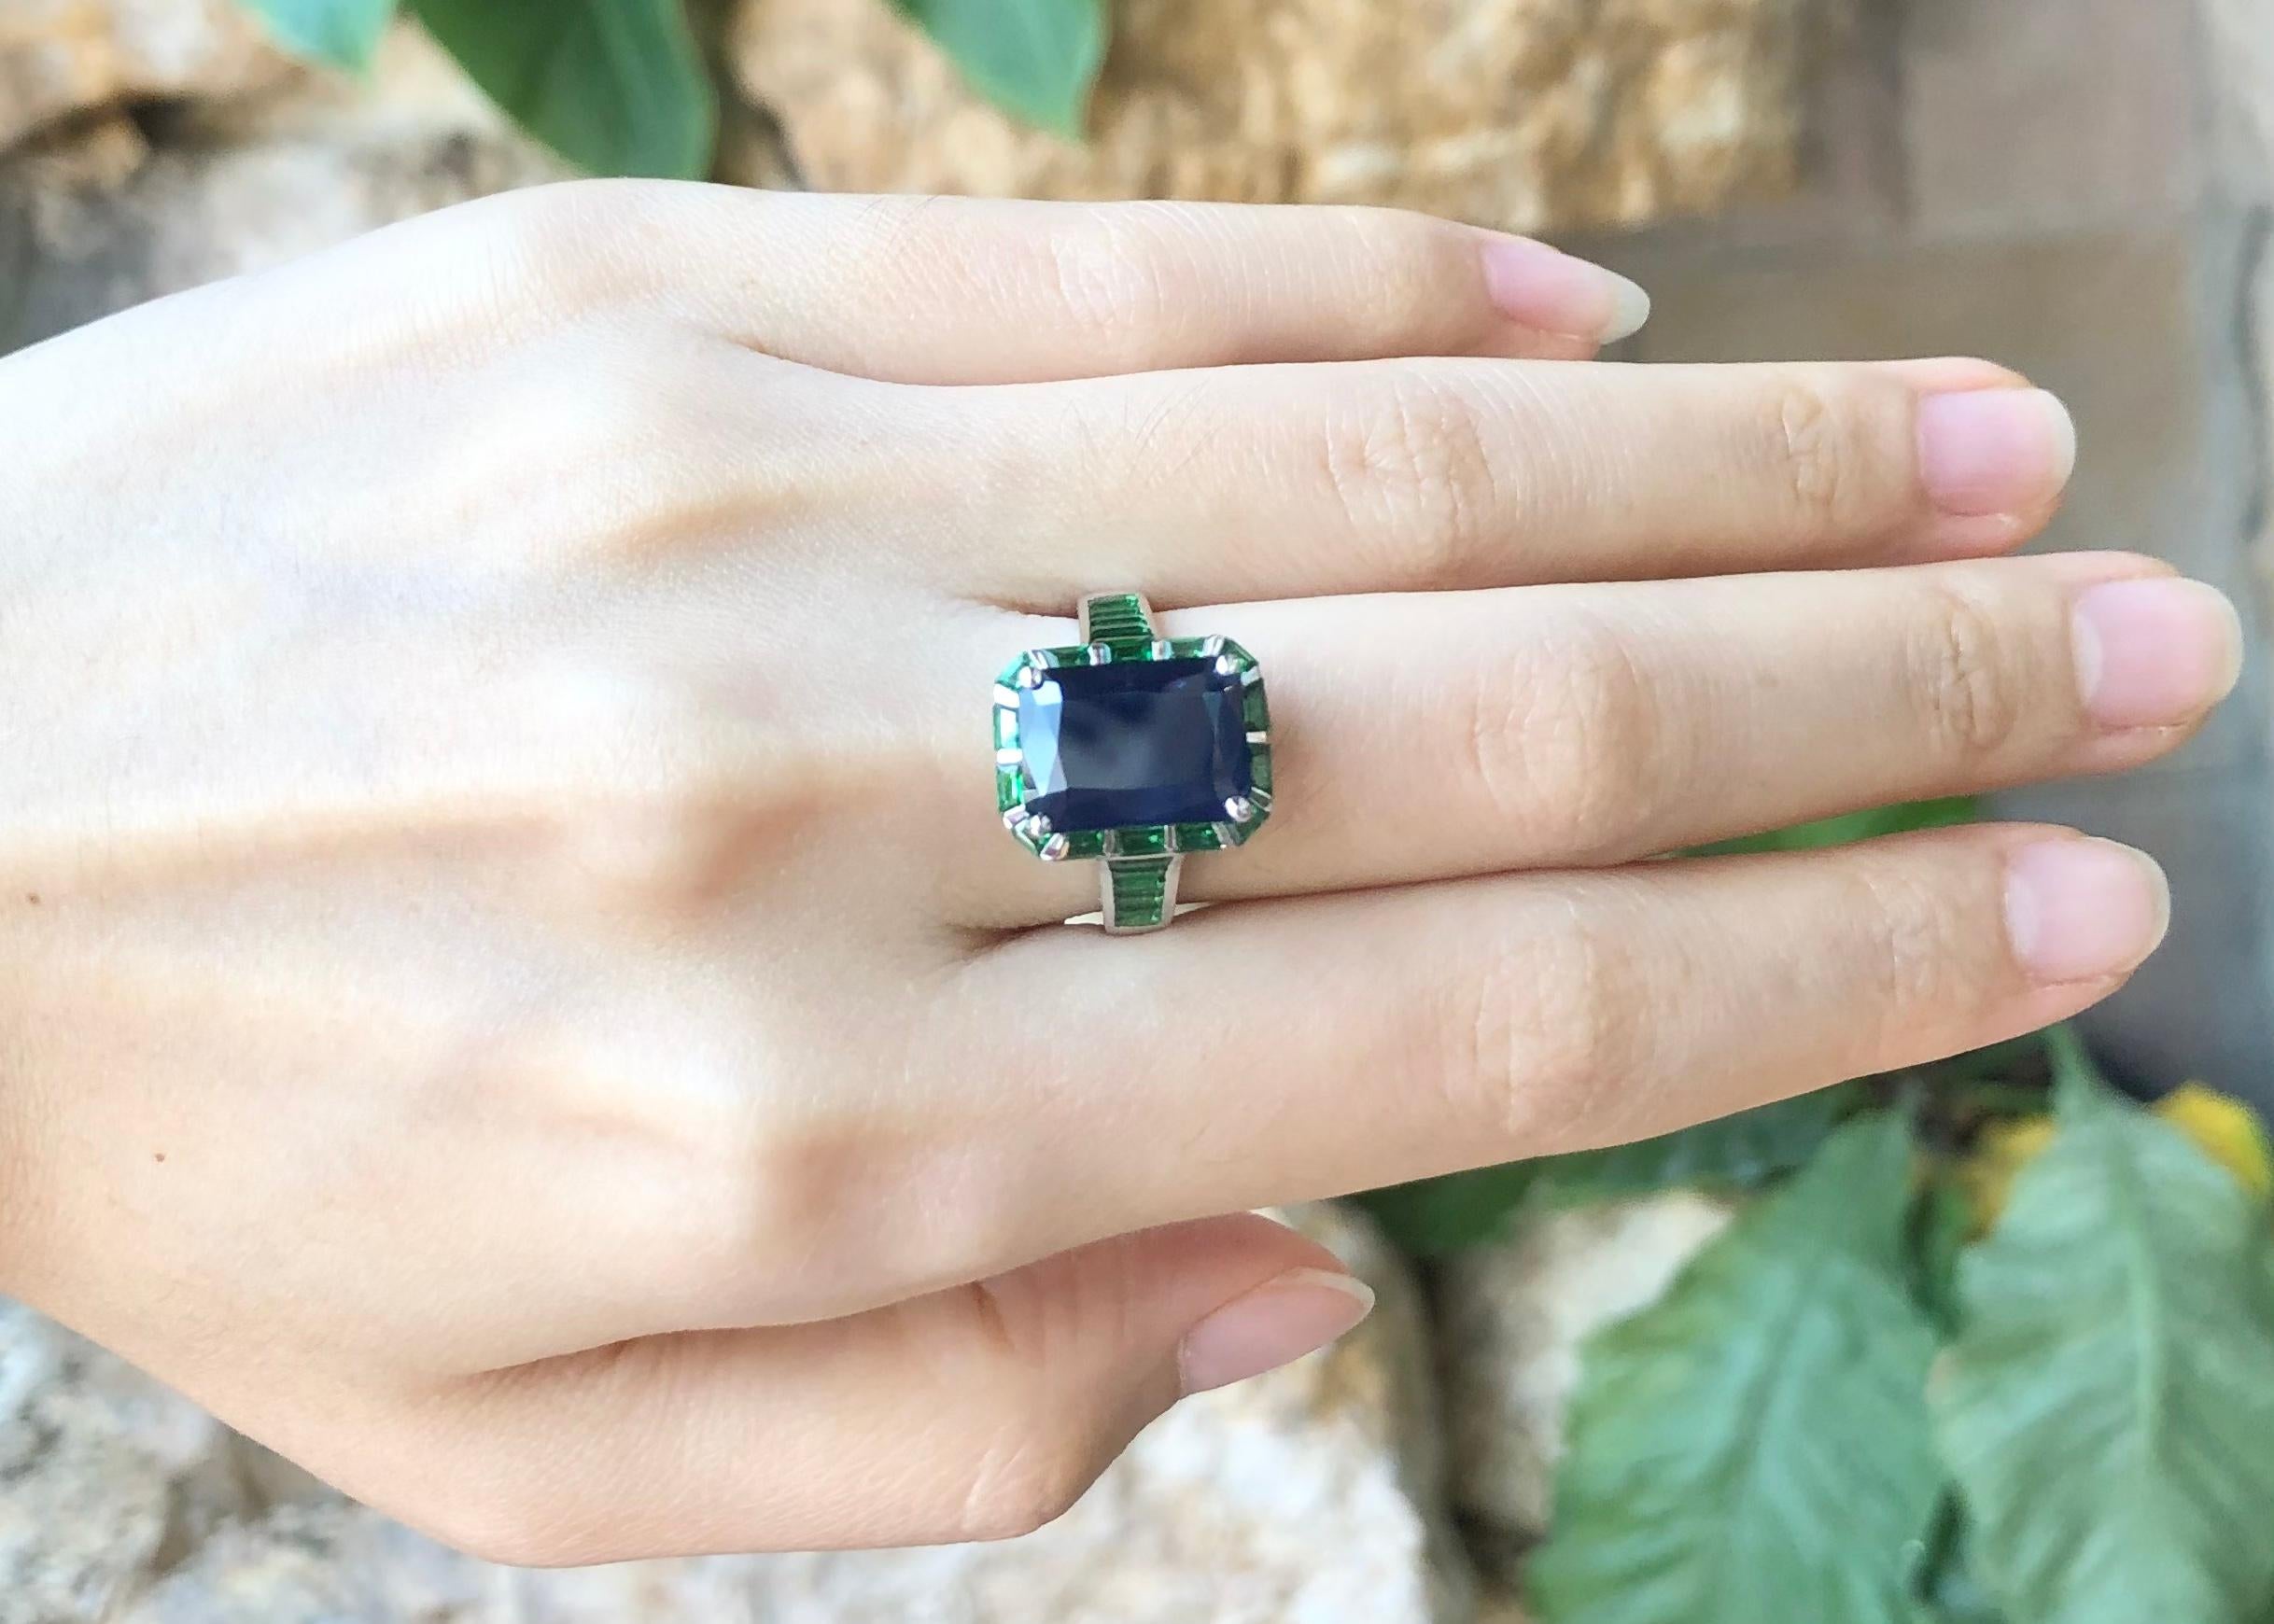 Blue Sapphire 5.68 carats with Tsavorite 2.11 carats Ring et in 18 Karat White Gold Settings

Width:  1.2 cm 
Length: 1.5 cm
Ring Size: 53
Total Weight: 7.33 grams



